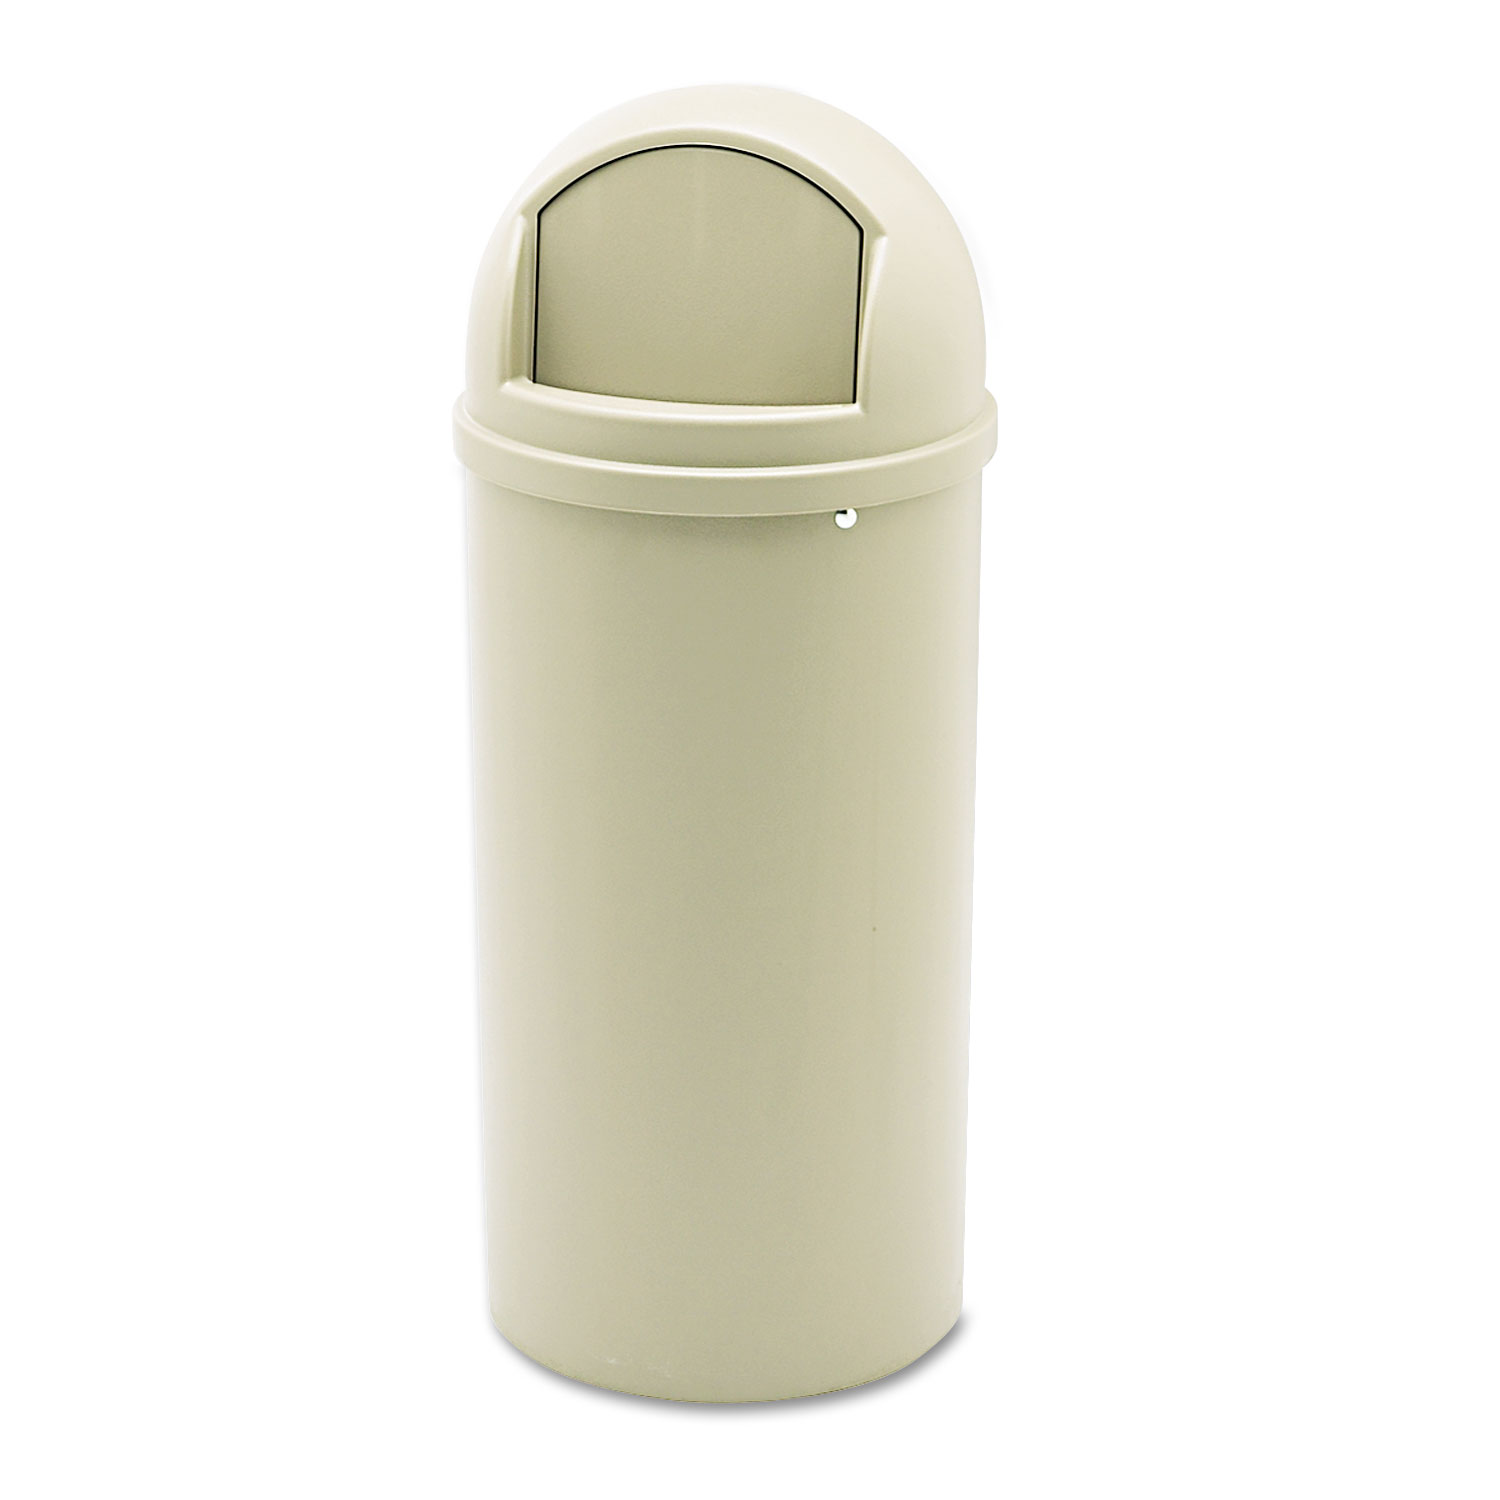 Marshal Classic Container, Round, Polyethylene, 15 gal, Beige